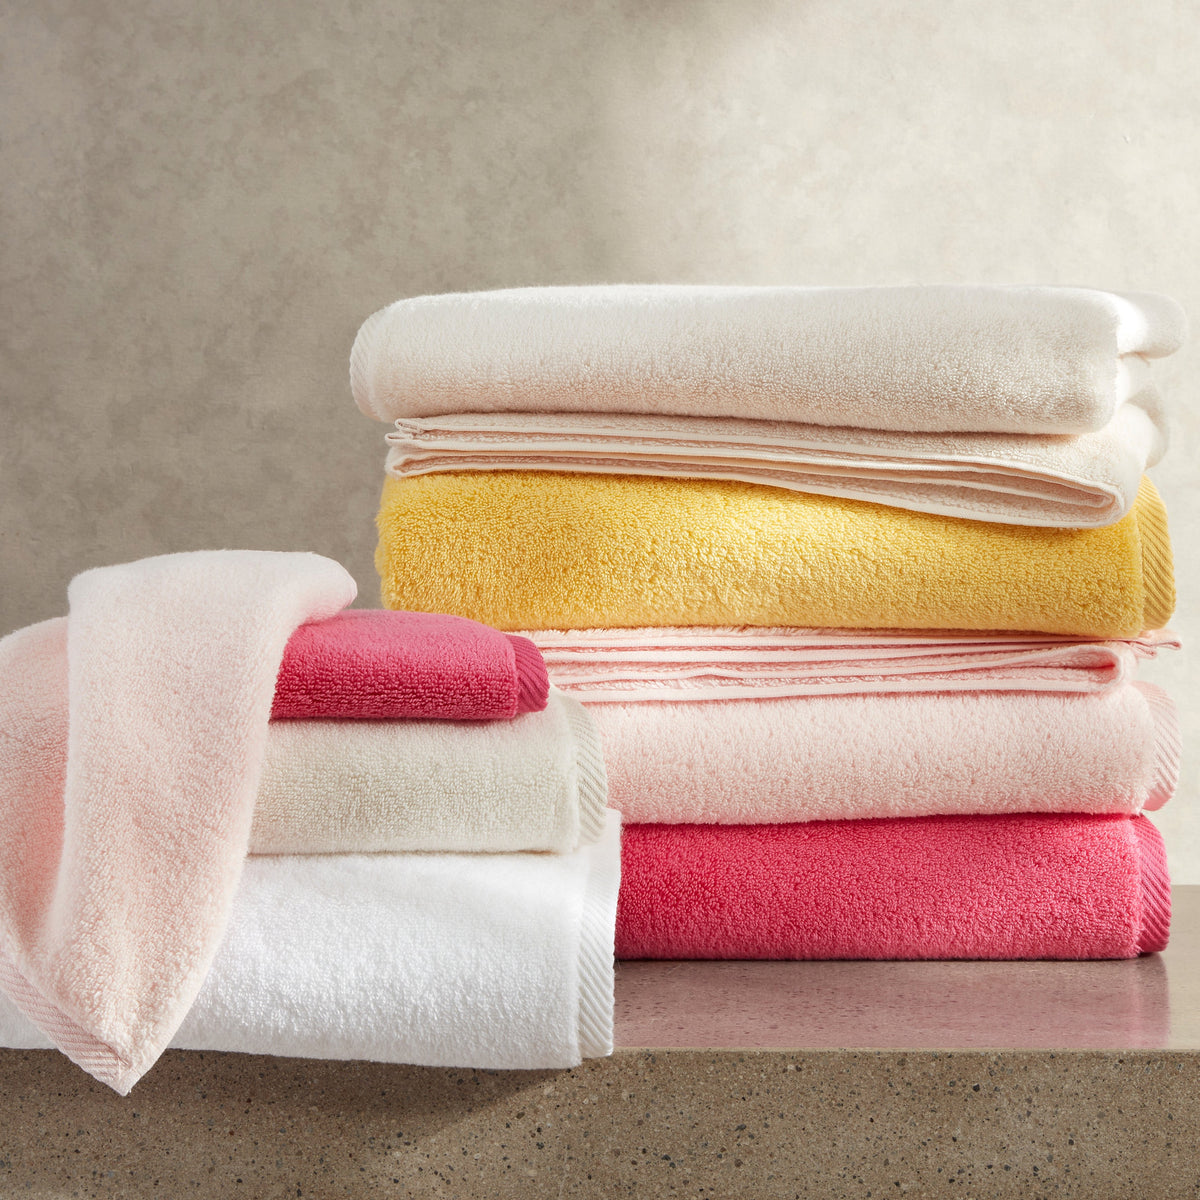 Bath Pure Towels Long Stapled Cotton Beach Spa Thicken Super Absorbent  Towel Sets